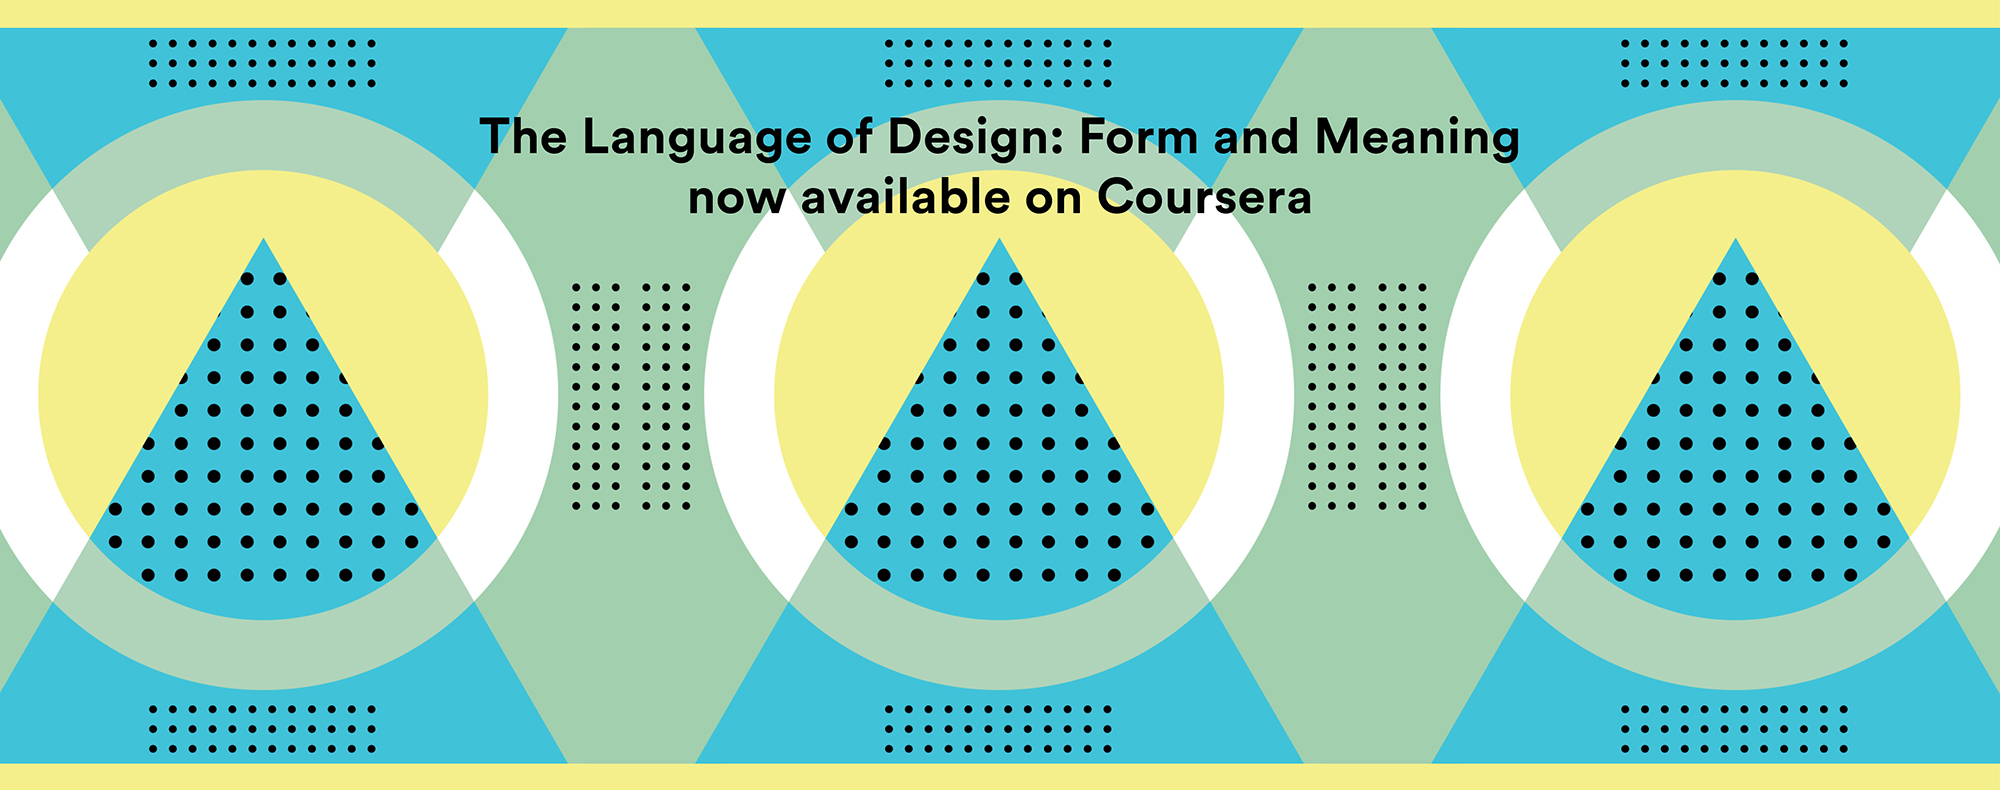 The Language of Design: Form and Meaning